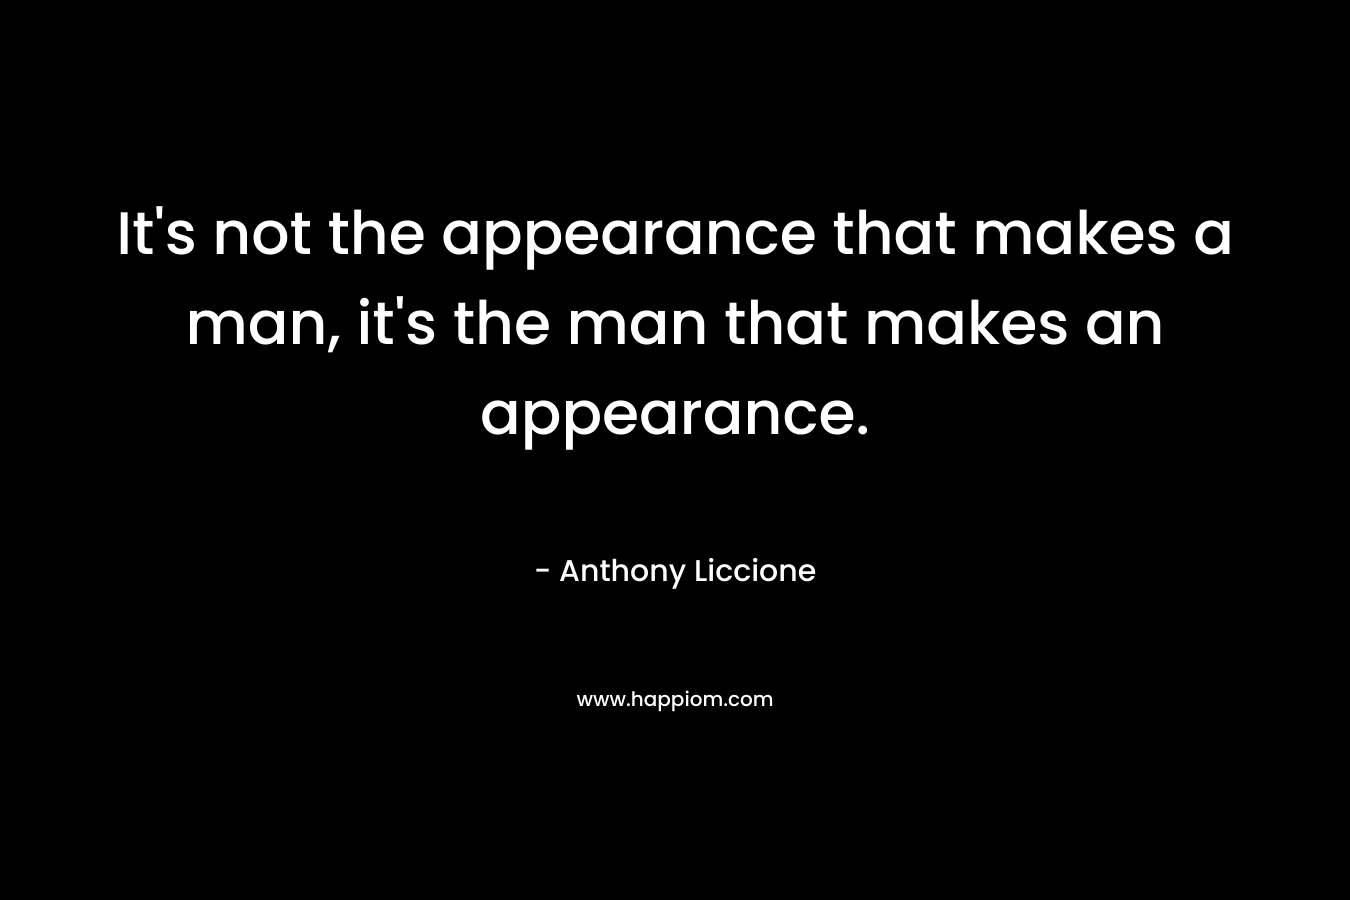 It's not the appearance that makes a man, it's the man that makes an appearance.